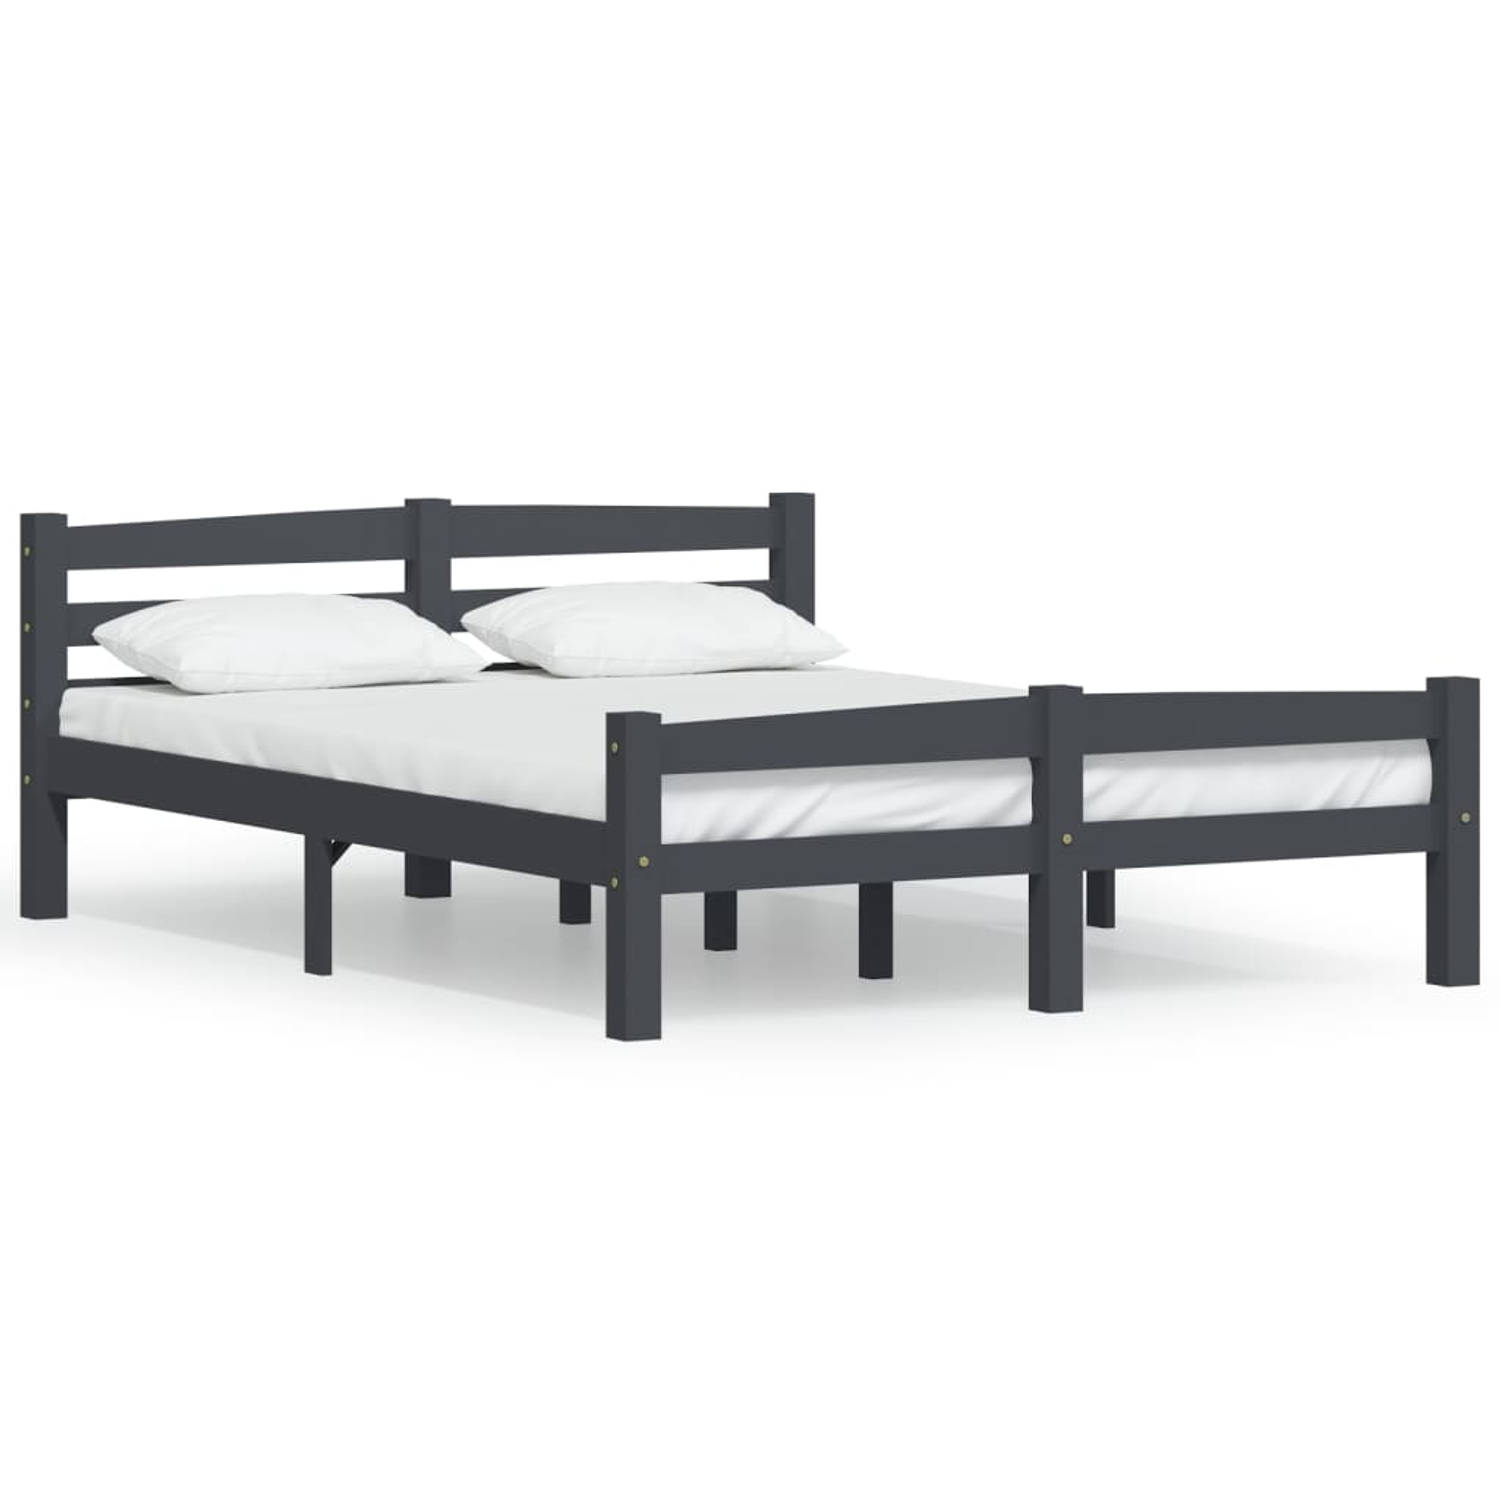 The Living Store Bedframe massief grenenhout donkergrijs 140x200 cm - Bedframe - Bedframe - Bed Frame - Bed Frames - Bed - Bedden - 2-persoonsbed - 2-persoonsbedden - Tweepersoons